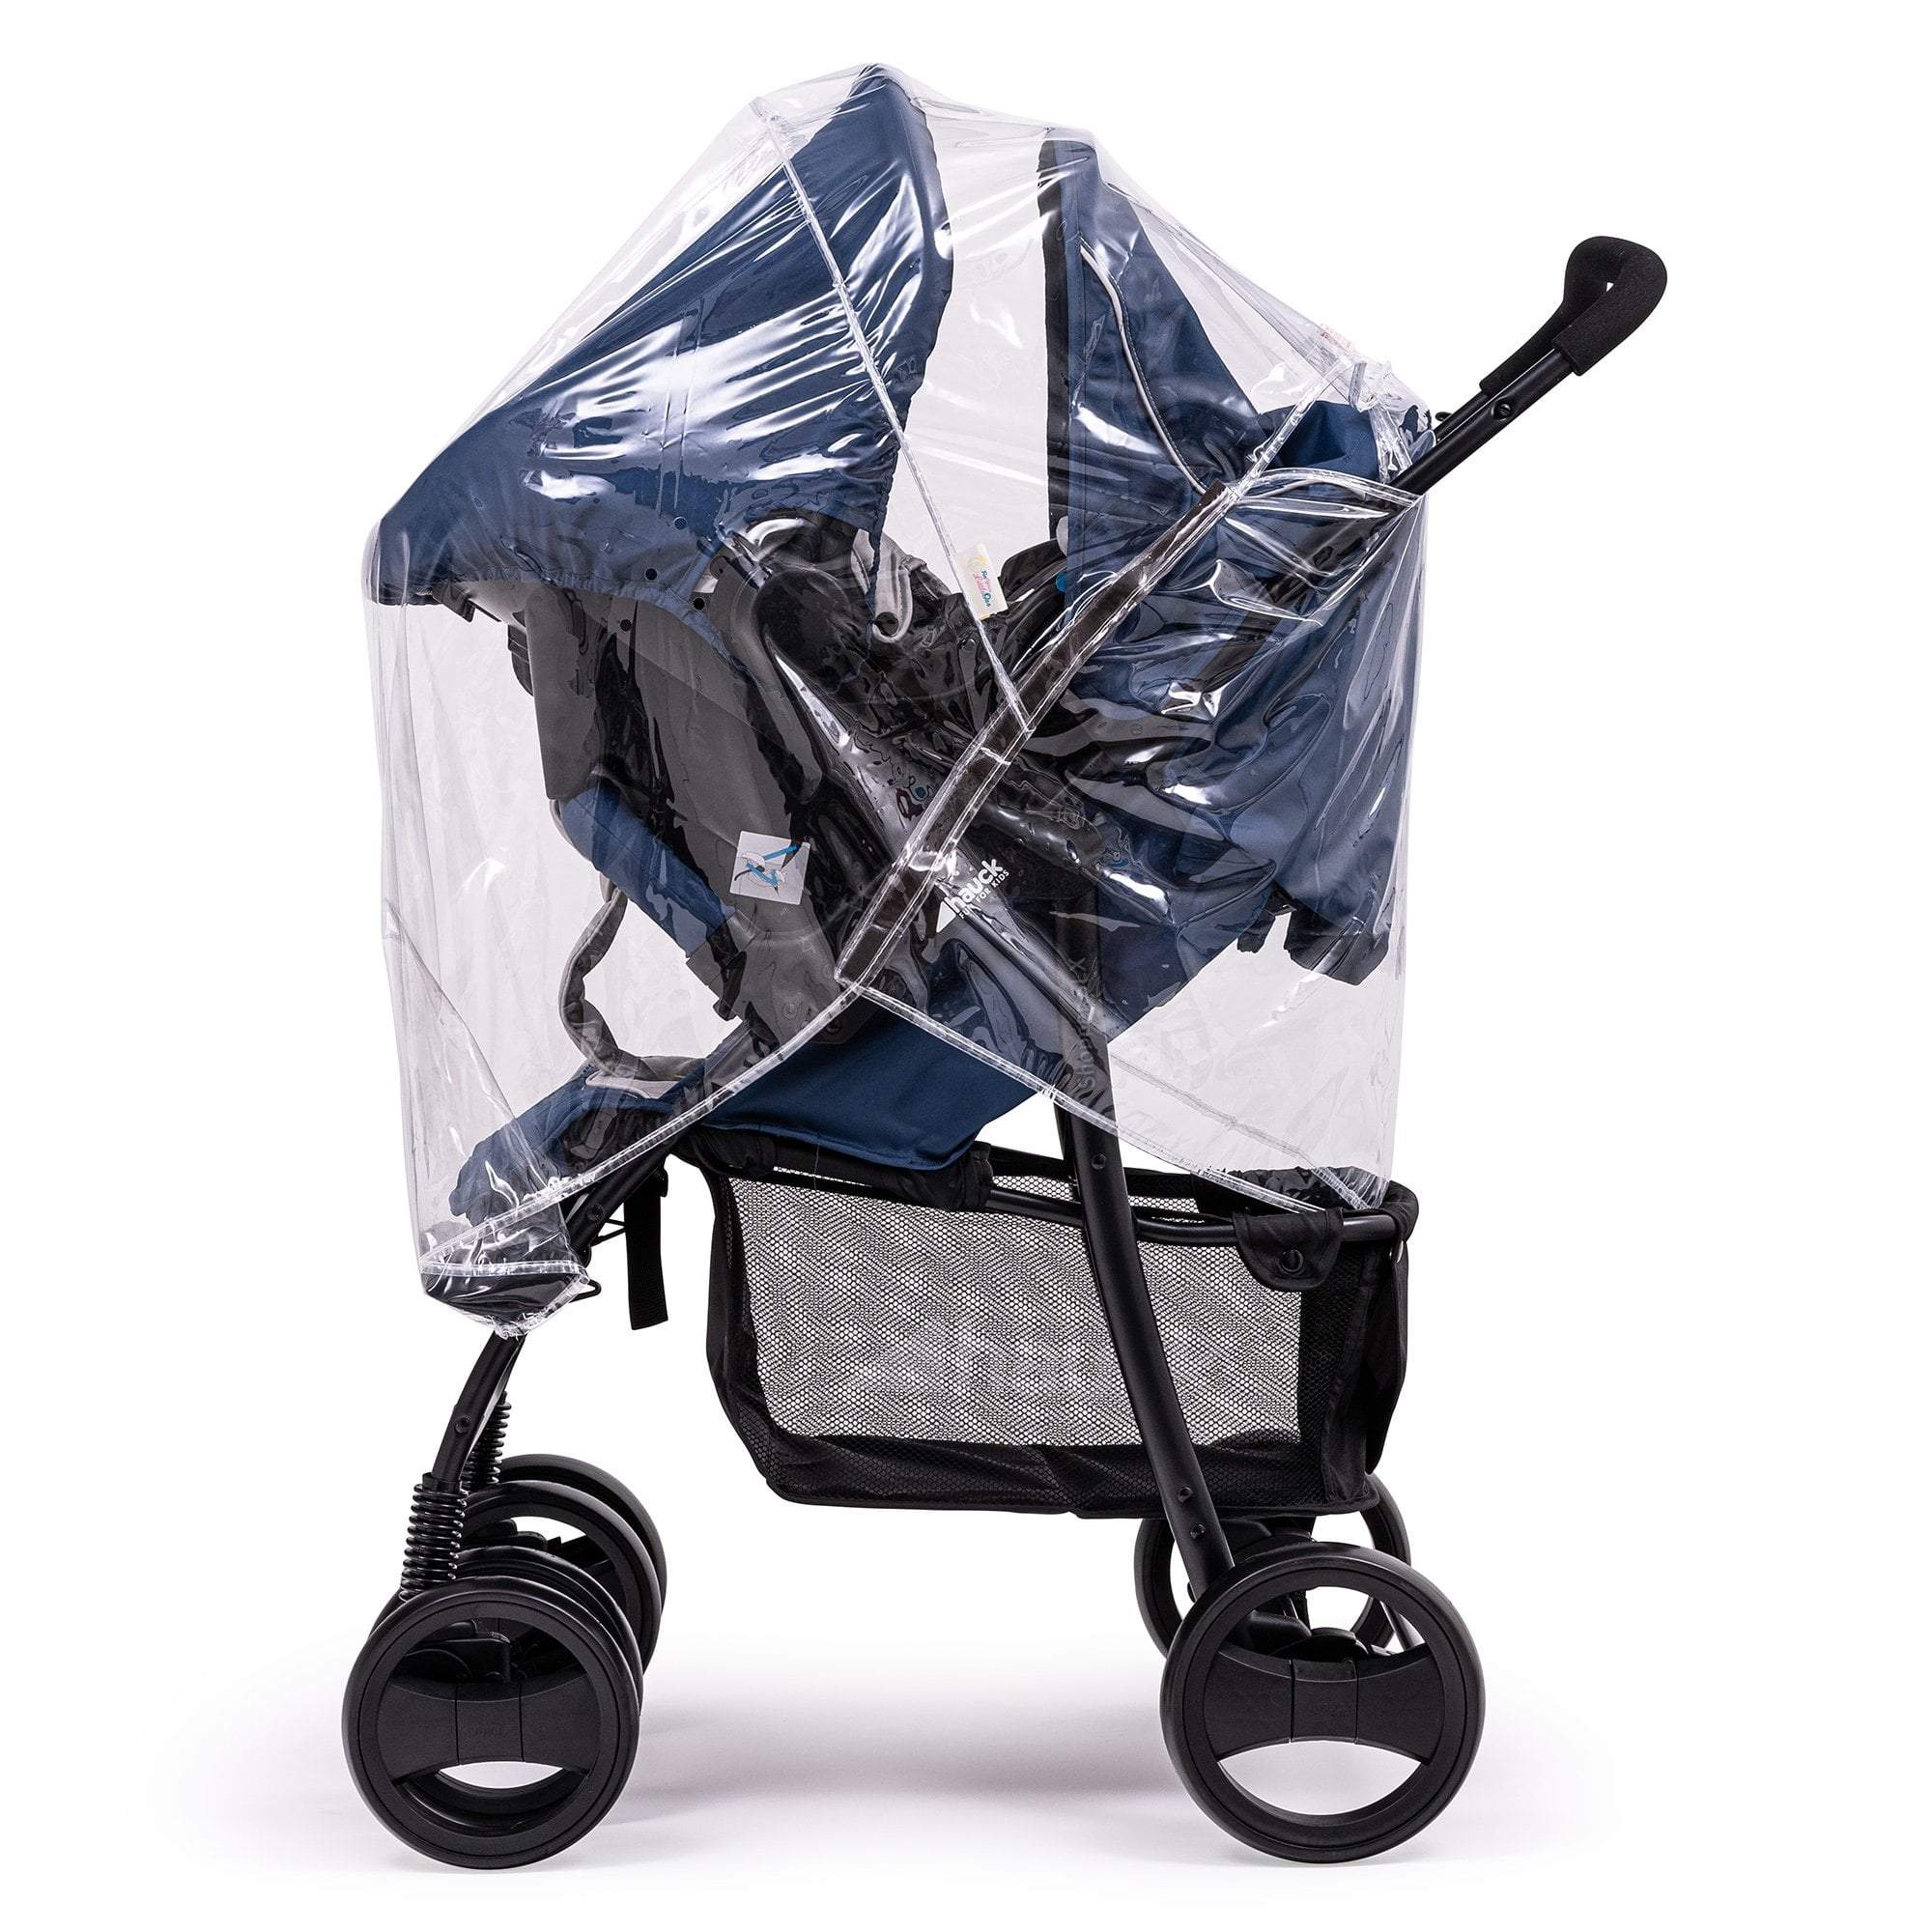 Travel System Raincover Compatible with I'coo - Fits All Models - For Your Little One